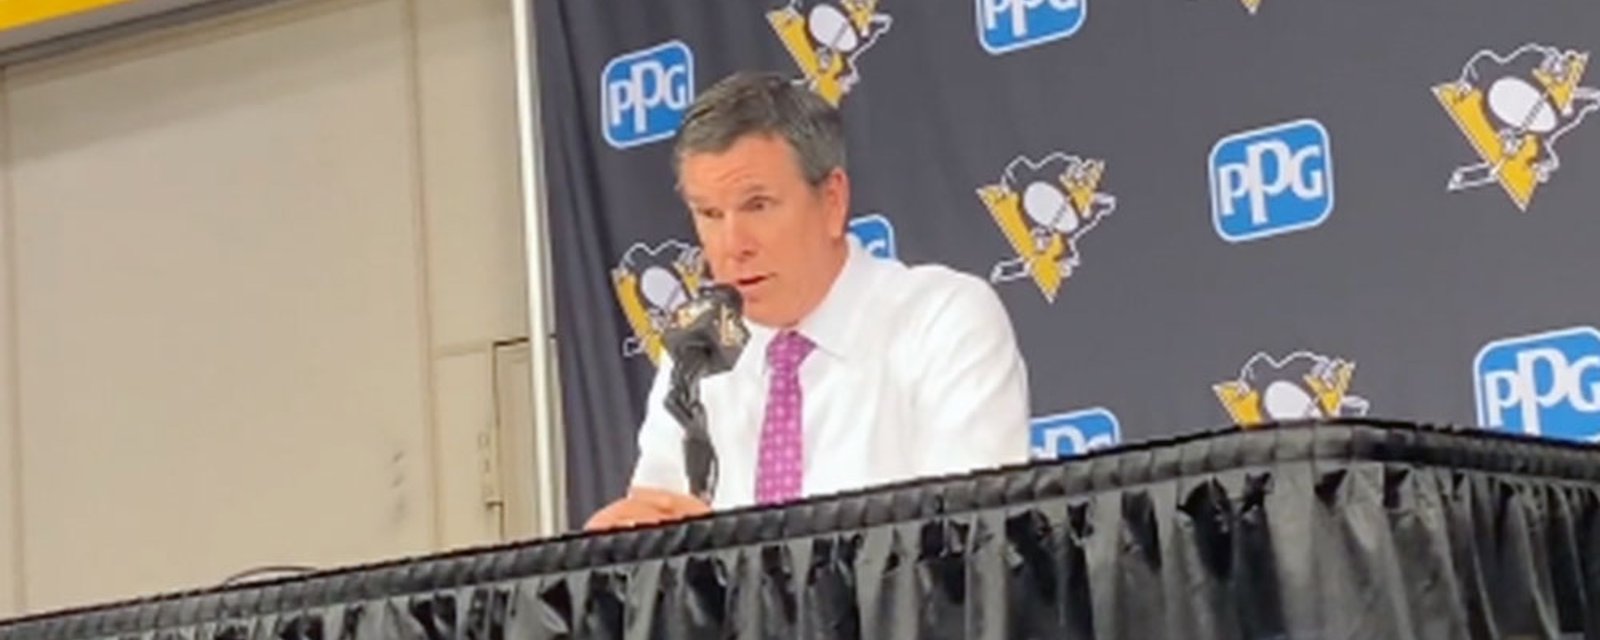 Coach Sullivan throws GM Hextall under the bus after brutal loss